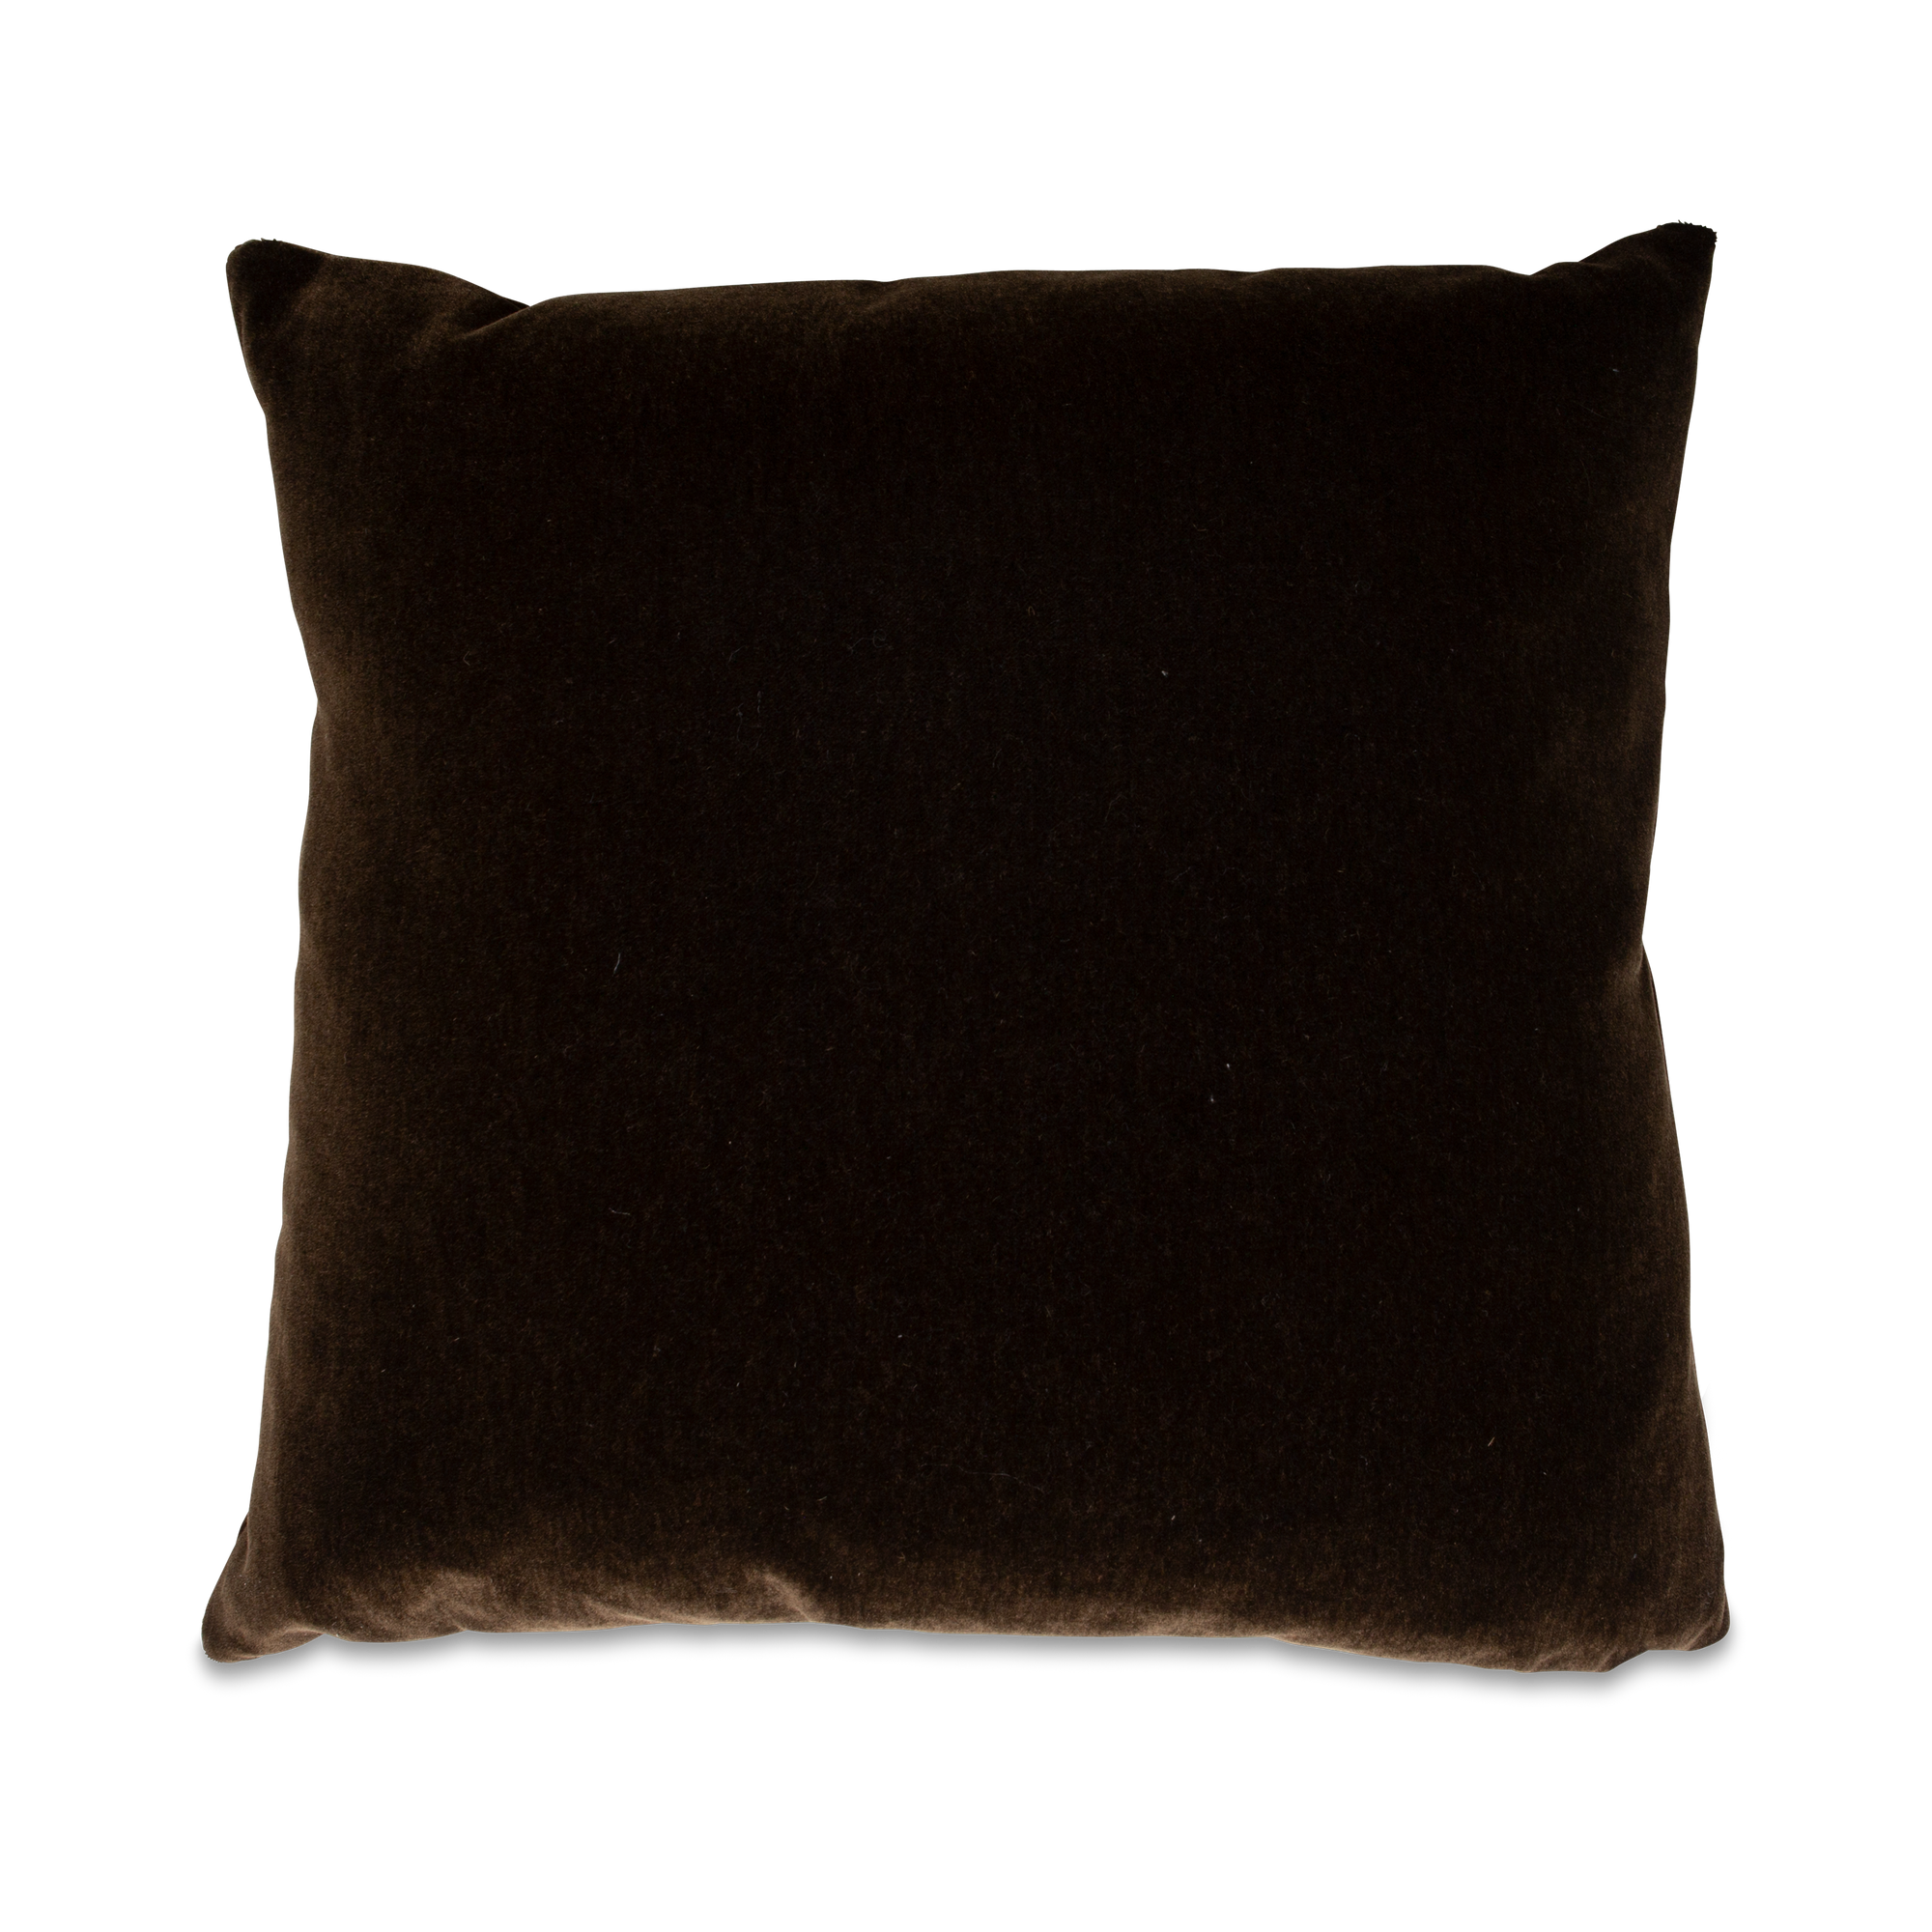 Using the finest quality yarn to provide a luxuriously soft touch, the Pure Mohair Pillow is made of plush and lustrous mohair.